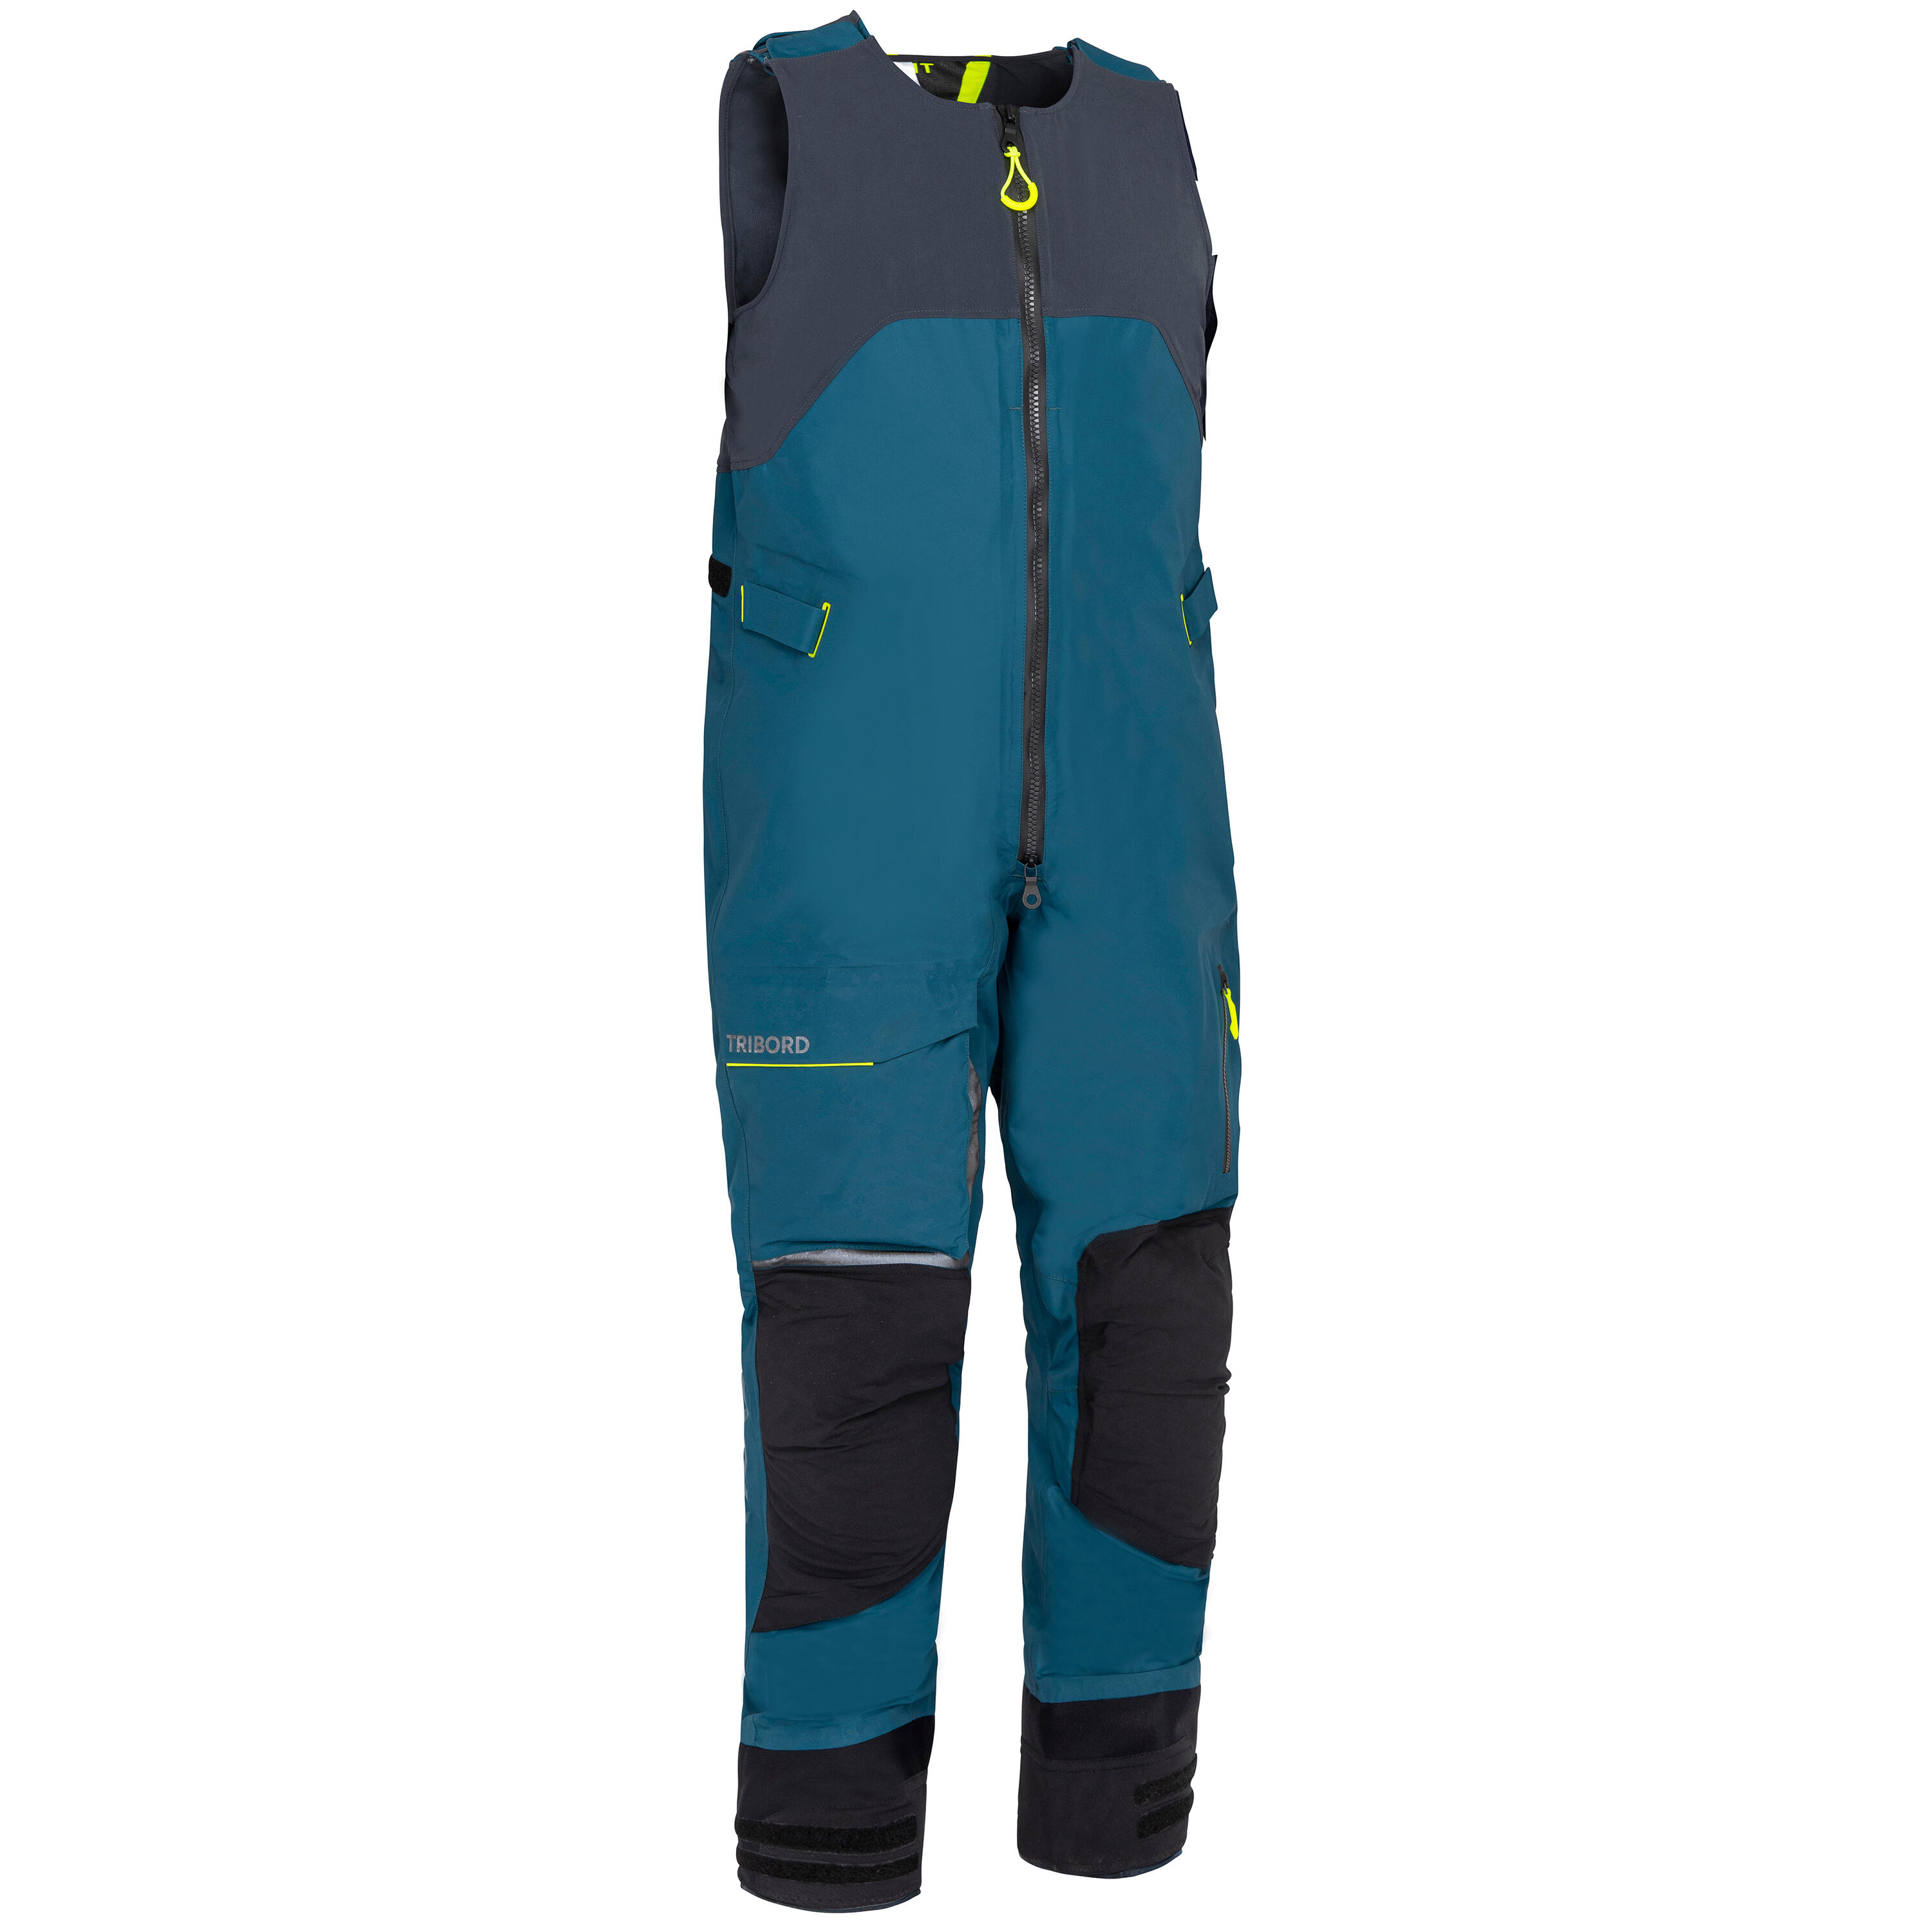 Adult Sailing overalls - Offshore Race 900 Petrol 1/16